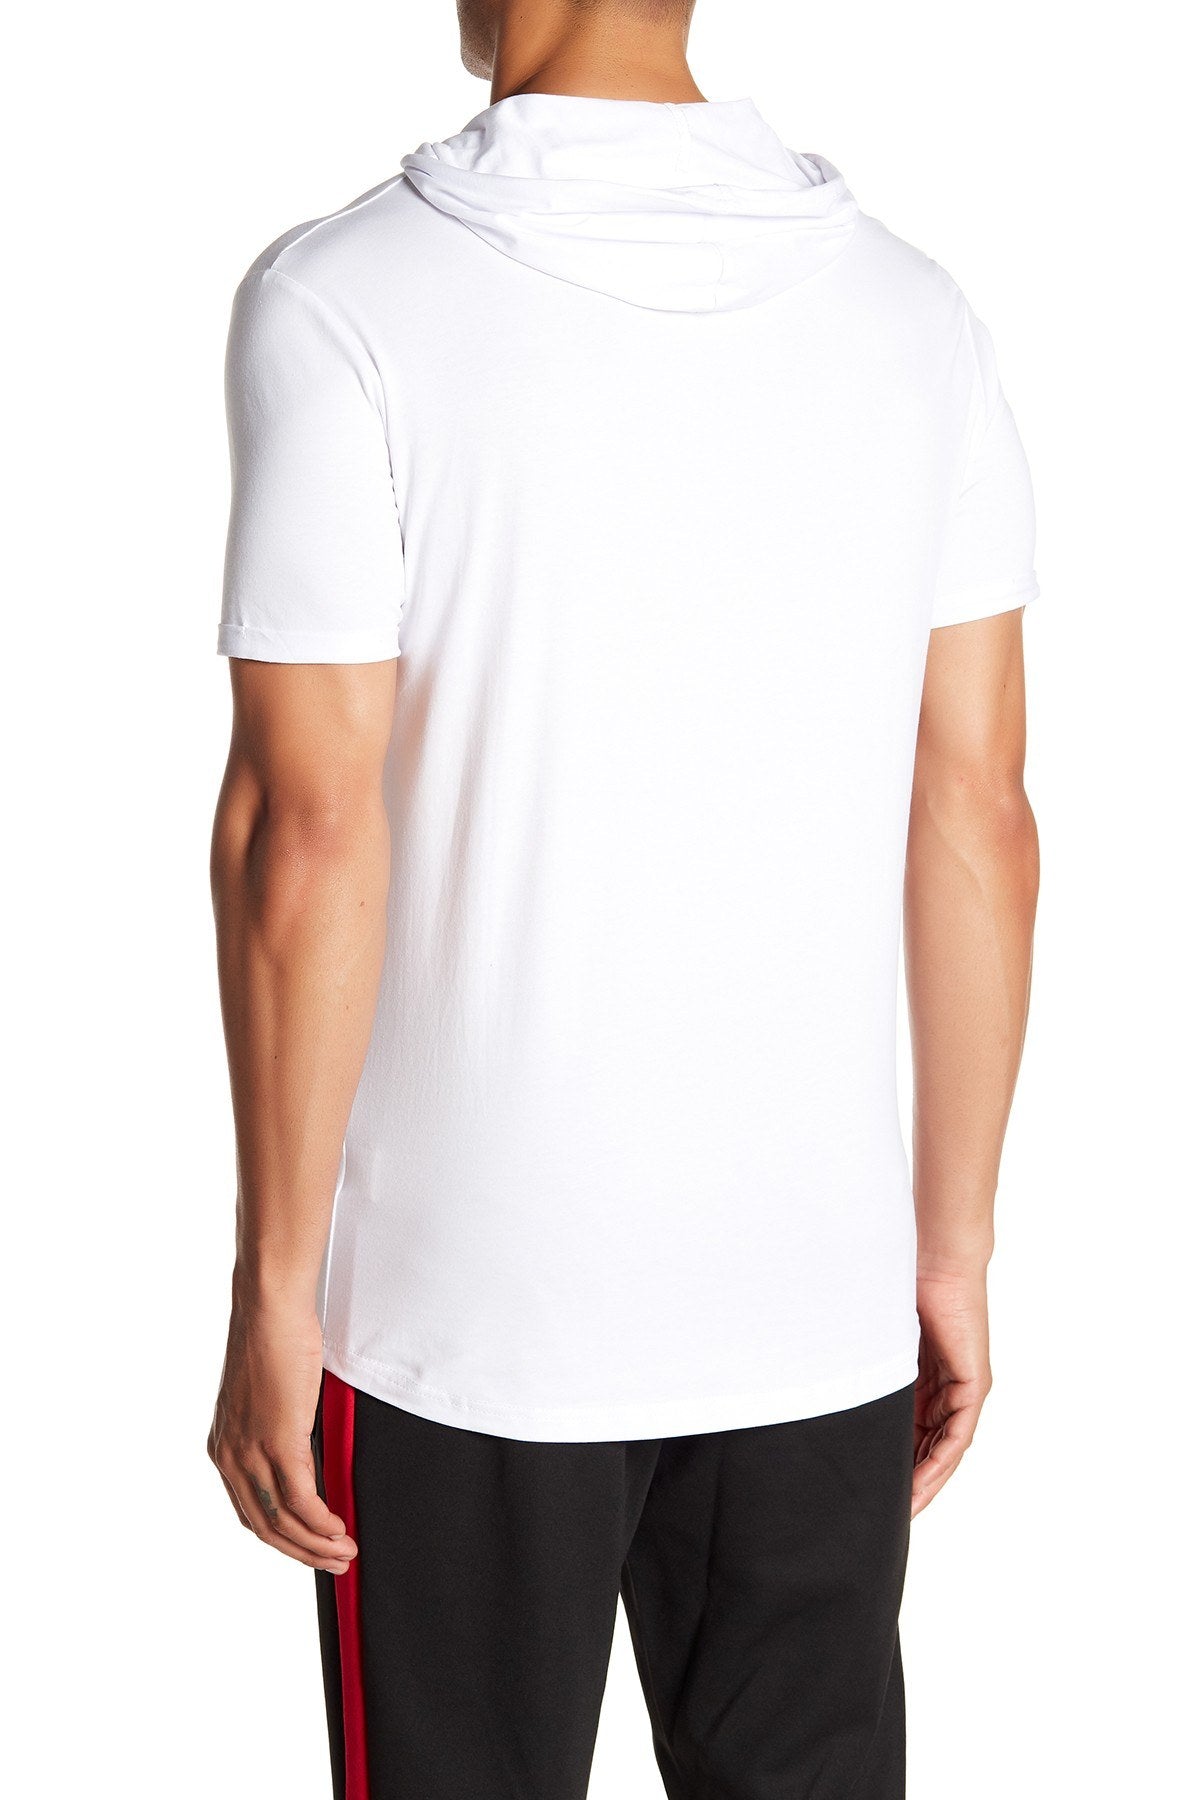 Tailored Recreation Premium White Front Pocket Hooded Tee